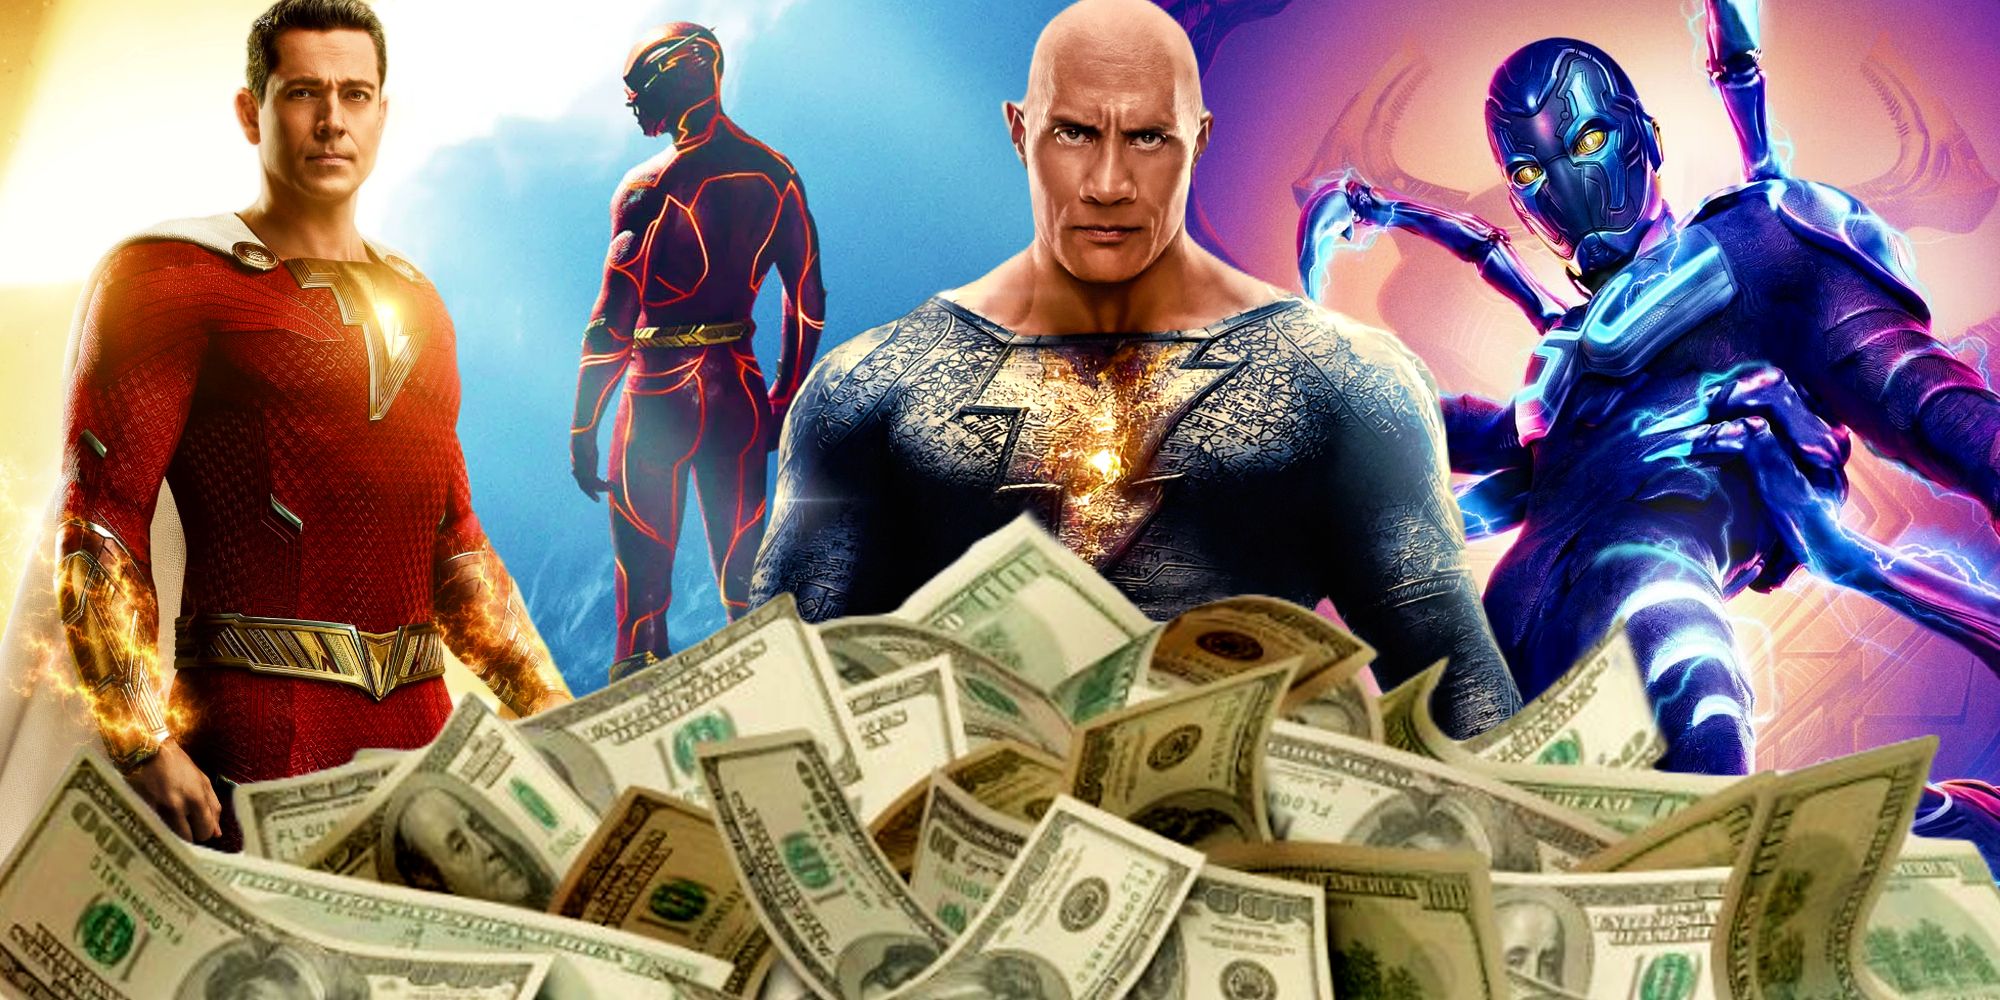 What Happened To Black Adam's Box Office: Why It's Losing Money